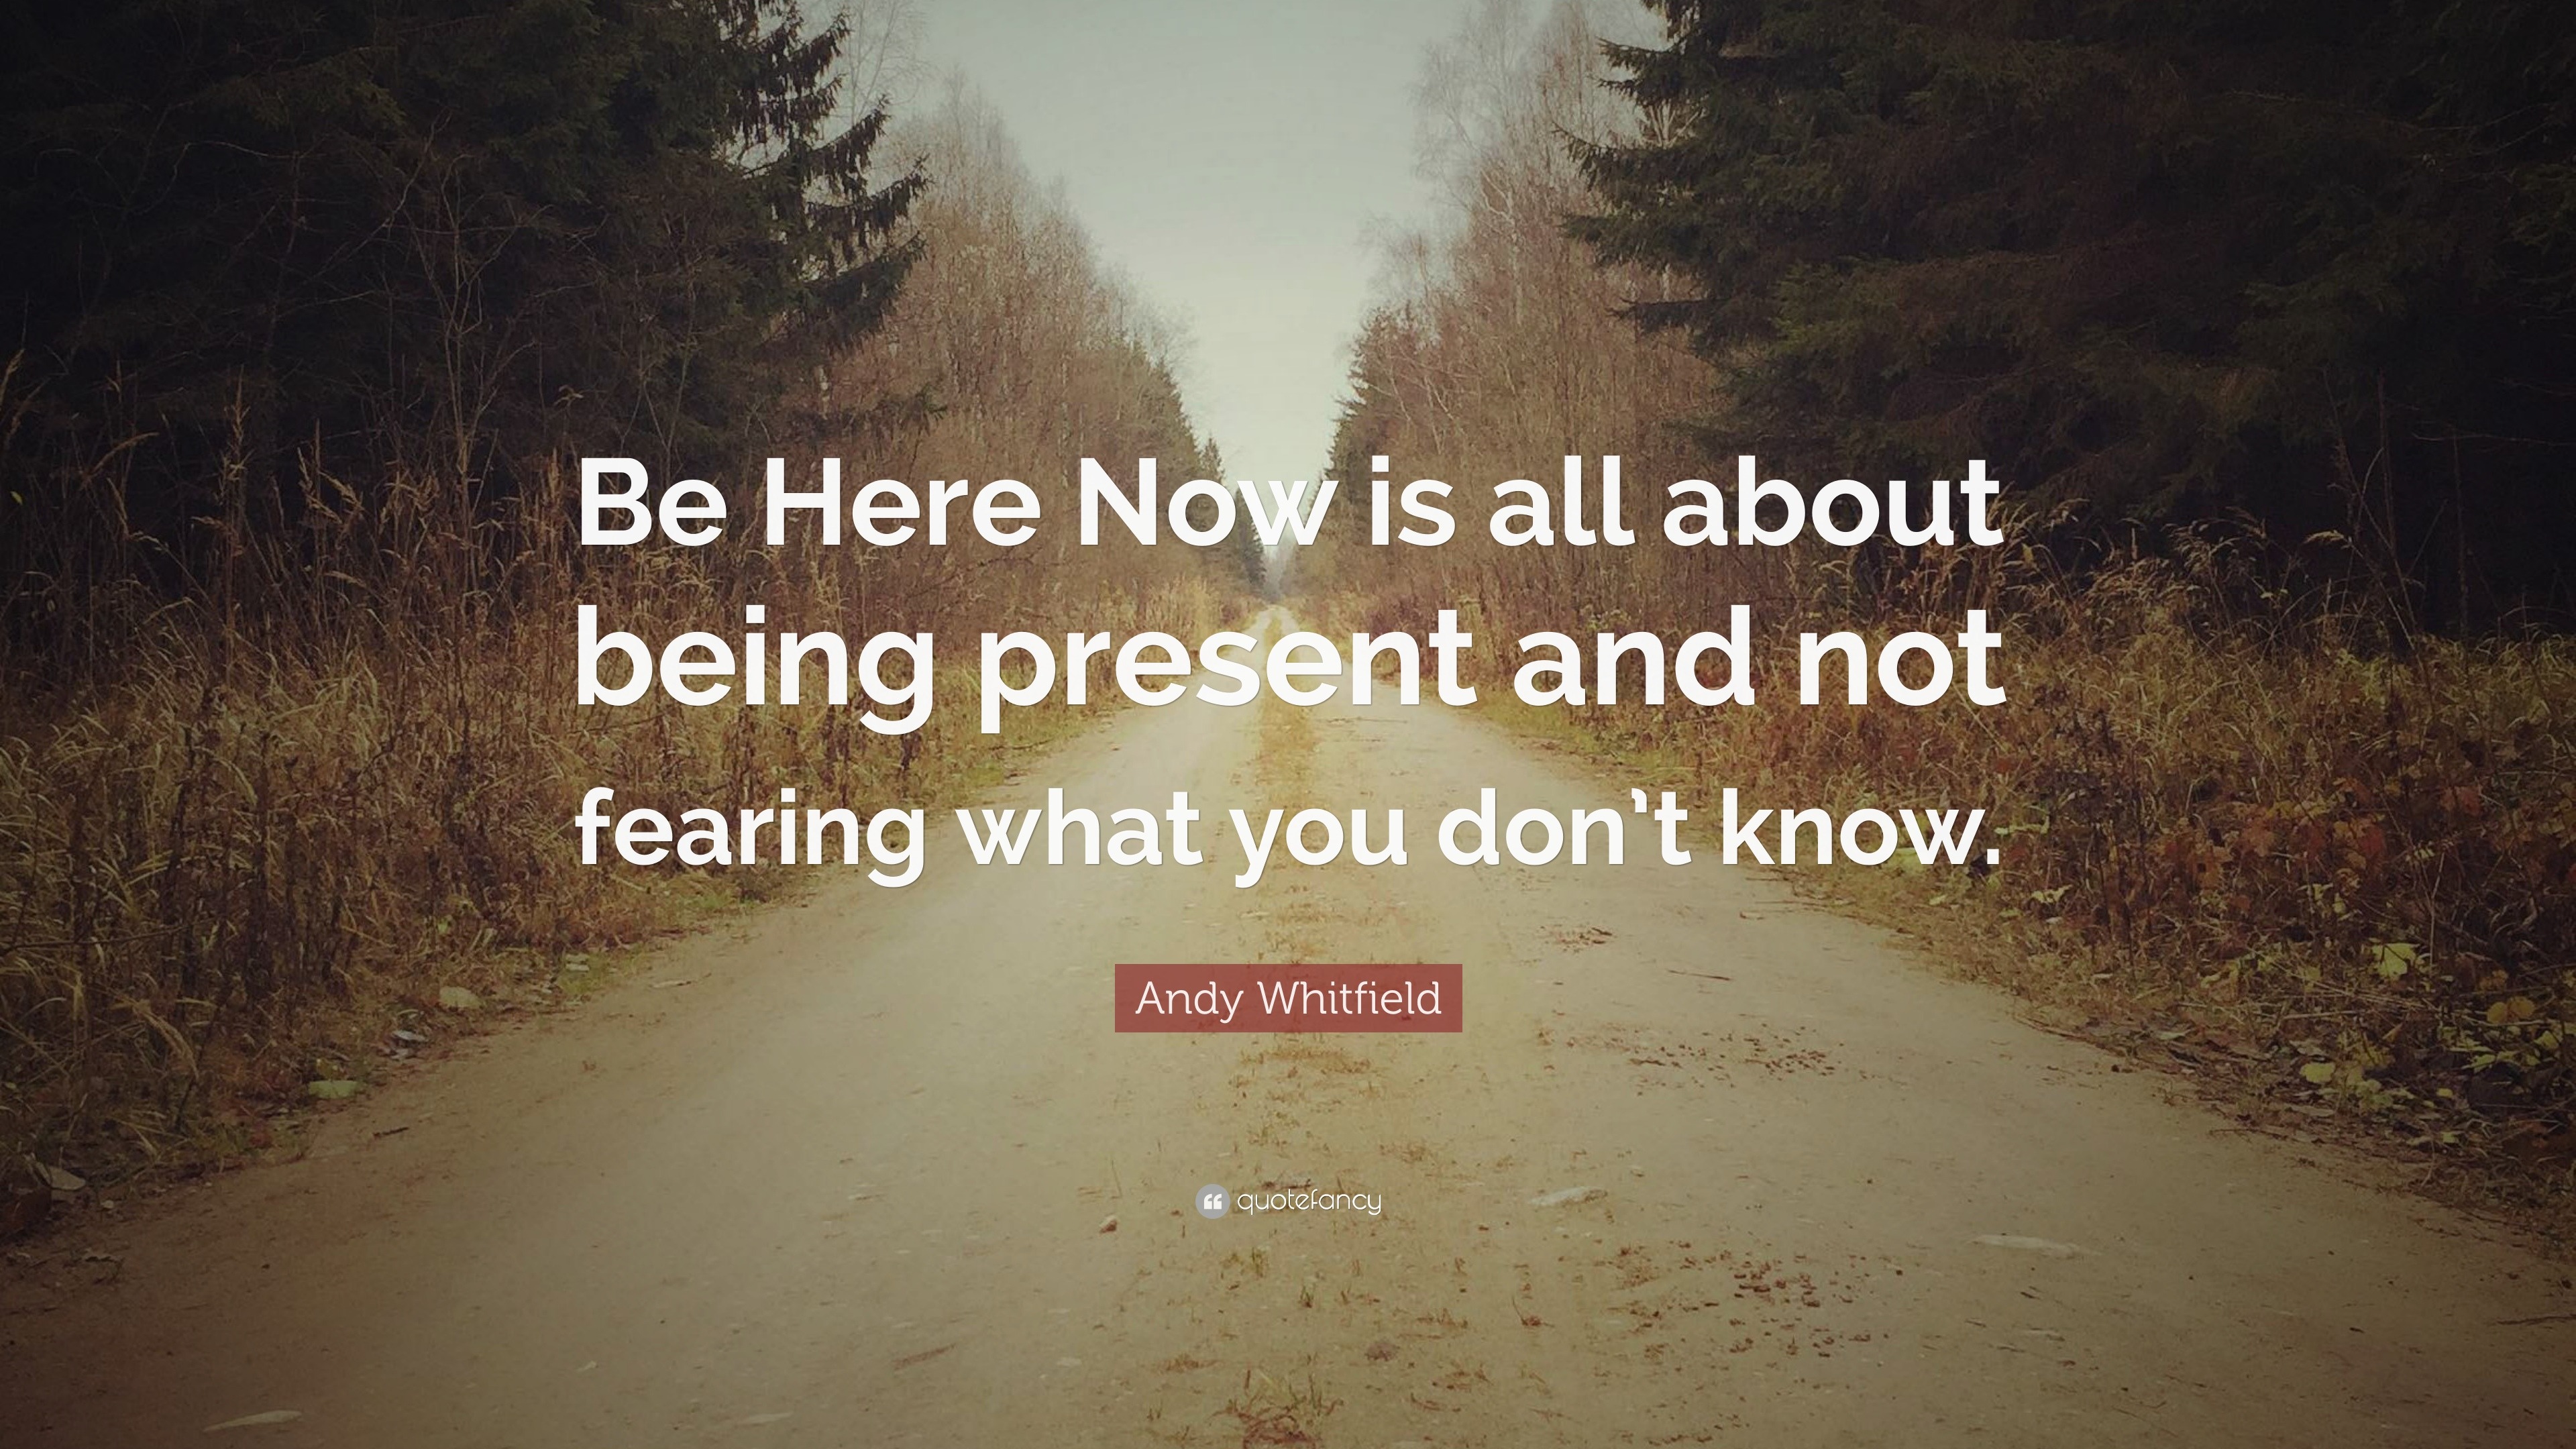 Andy Whitfield Quote “Be Here Now is all about being present and not